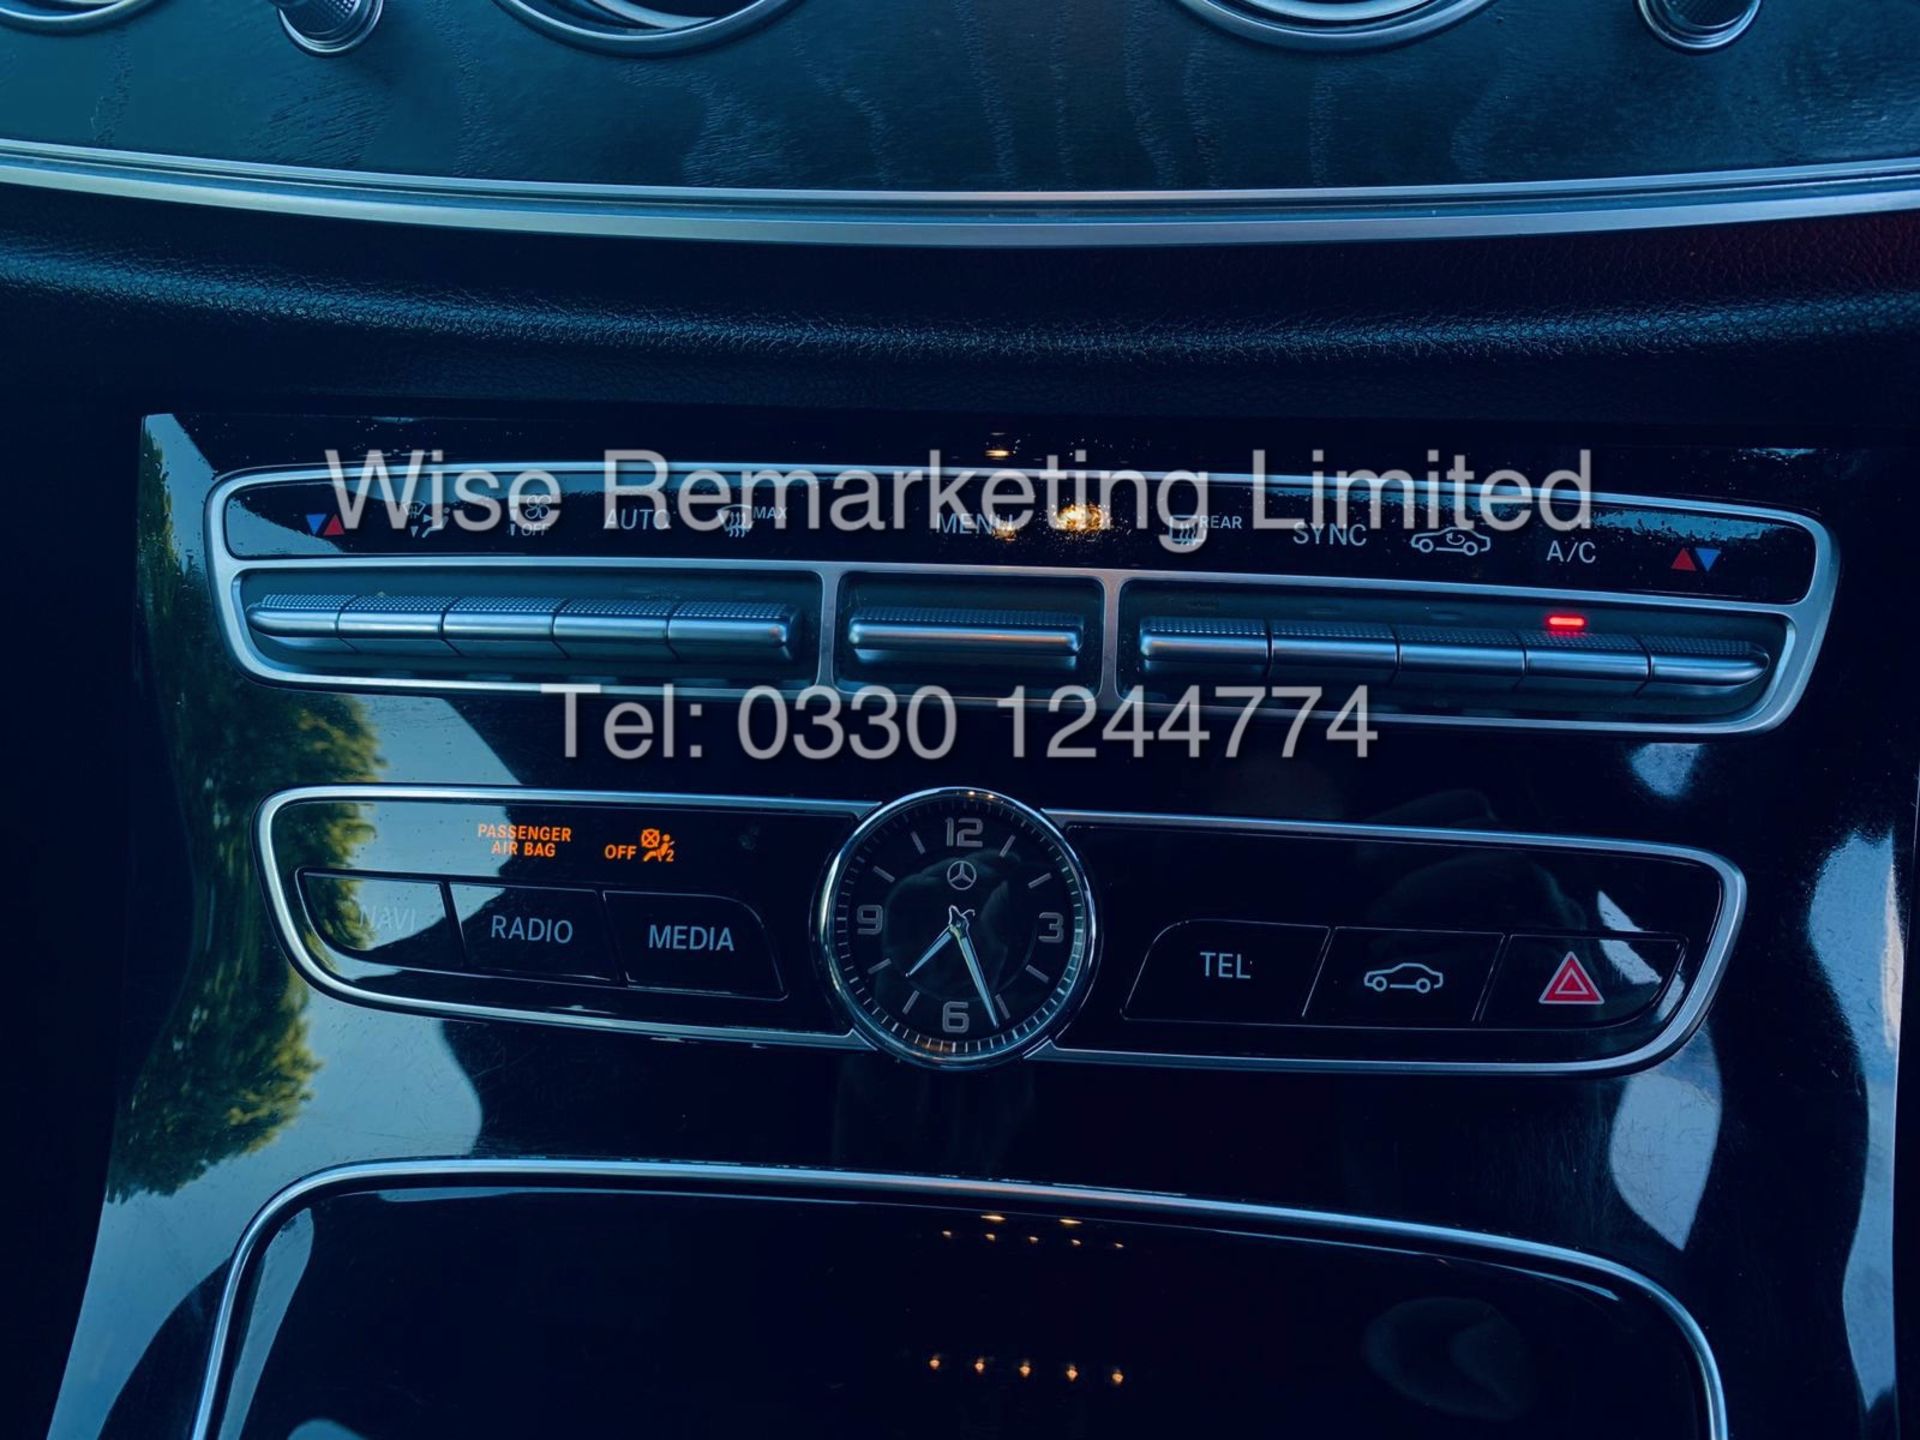 MERCEDES E CLASS ESTATE E220D AMG LINE 2017 / 9G -TRONIC / *LOW MILES* / 1 OWNER - Image 31 of 42